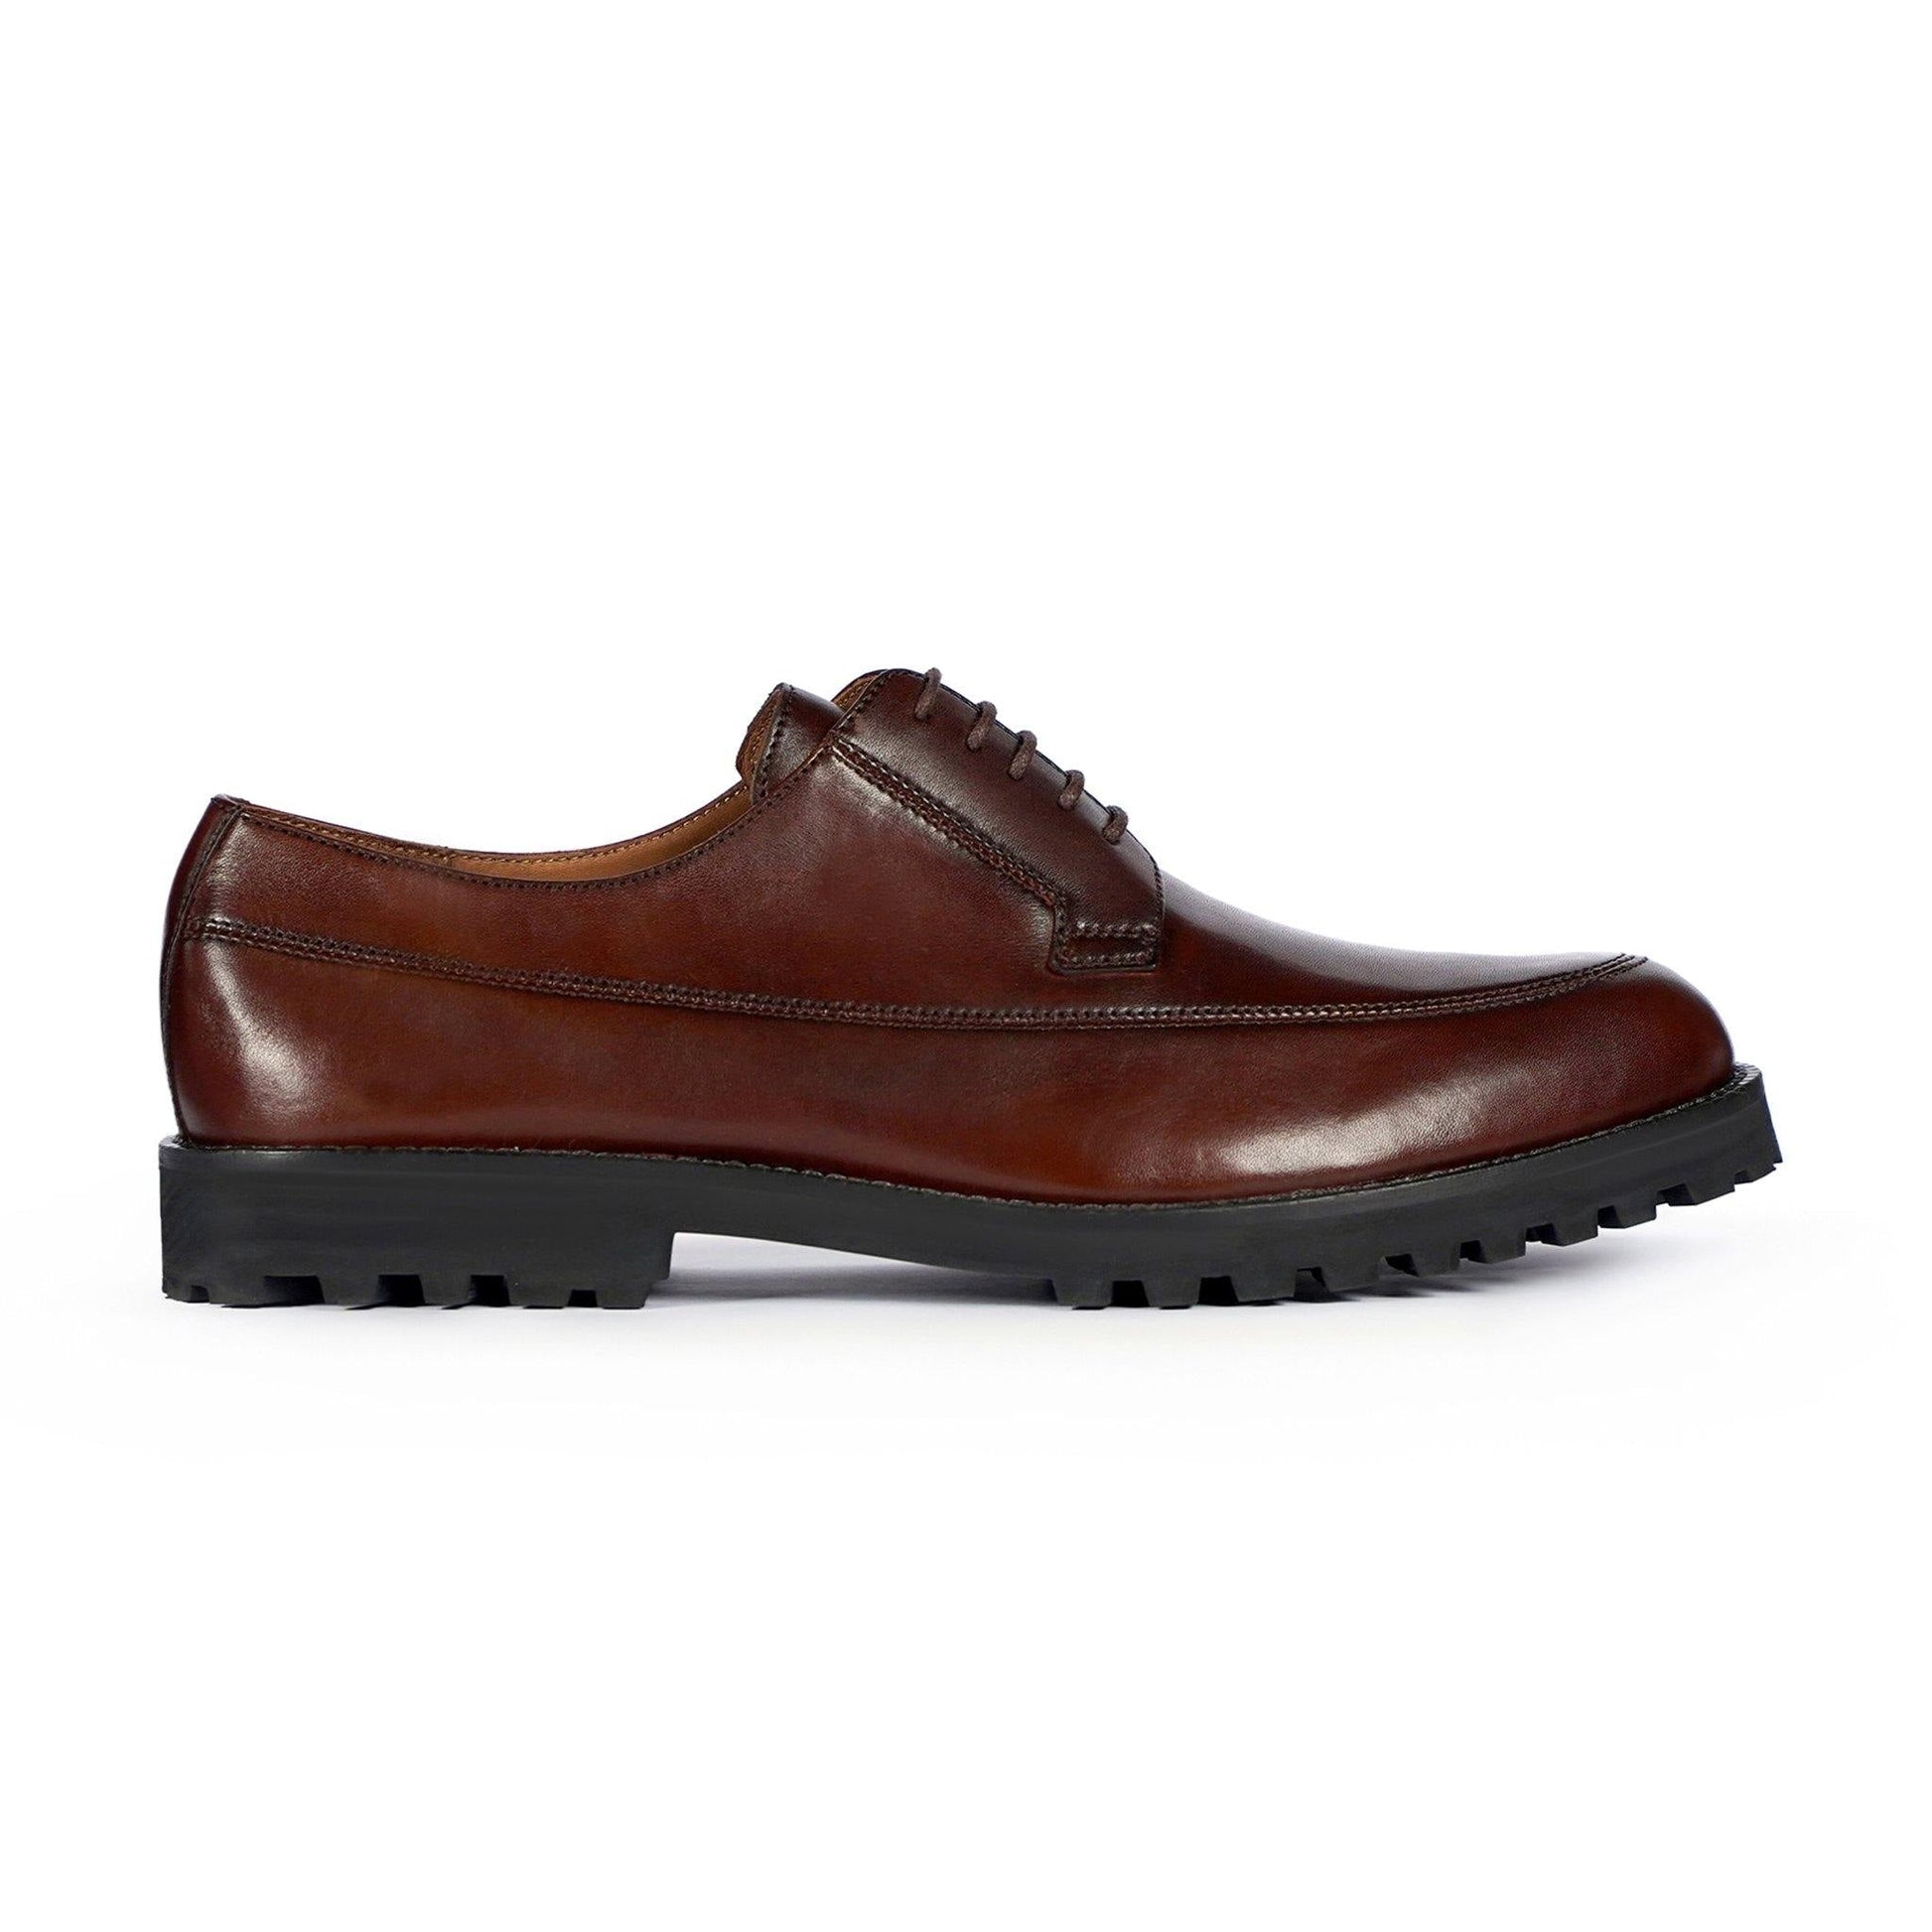 Mens Derby Shoes | Suede & Leather Shoes Derby Boots, derby shoes, derby shoes men, Leather Boots